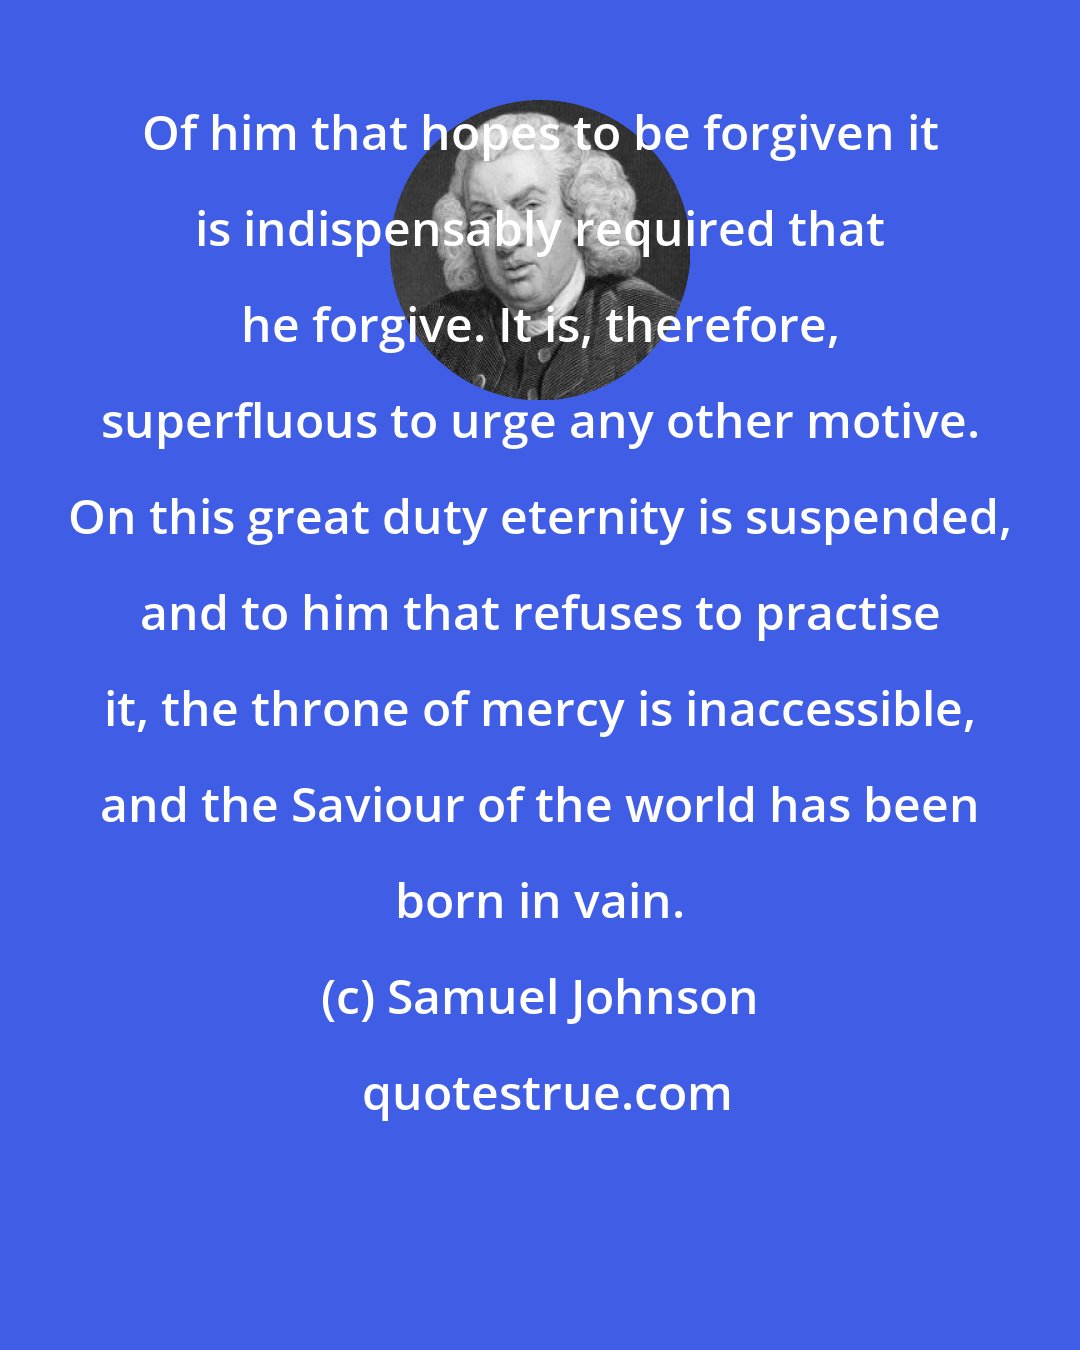 Samuel Johnson: Of him that hopes to be forgiven it is indispensably required that he forgive. It is, therefore, superfluous to urge any other motive. On this great duty eternity is suspended, and to him that refuses to practise it, the throne of mercy is inaccessible, and the Saviour of the world has been born in vain.